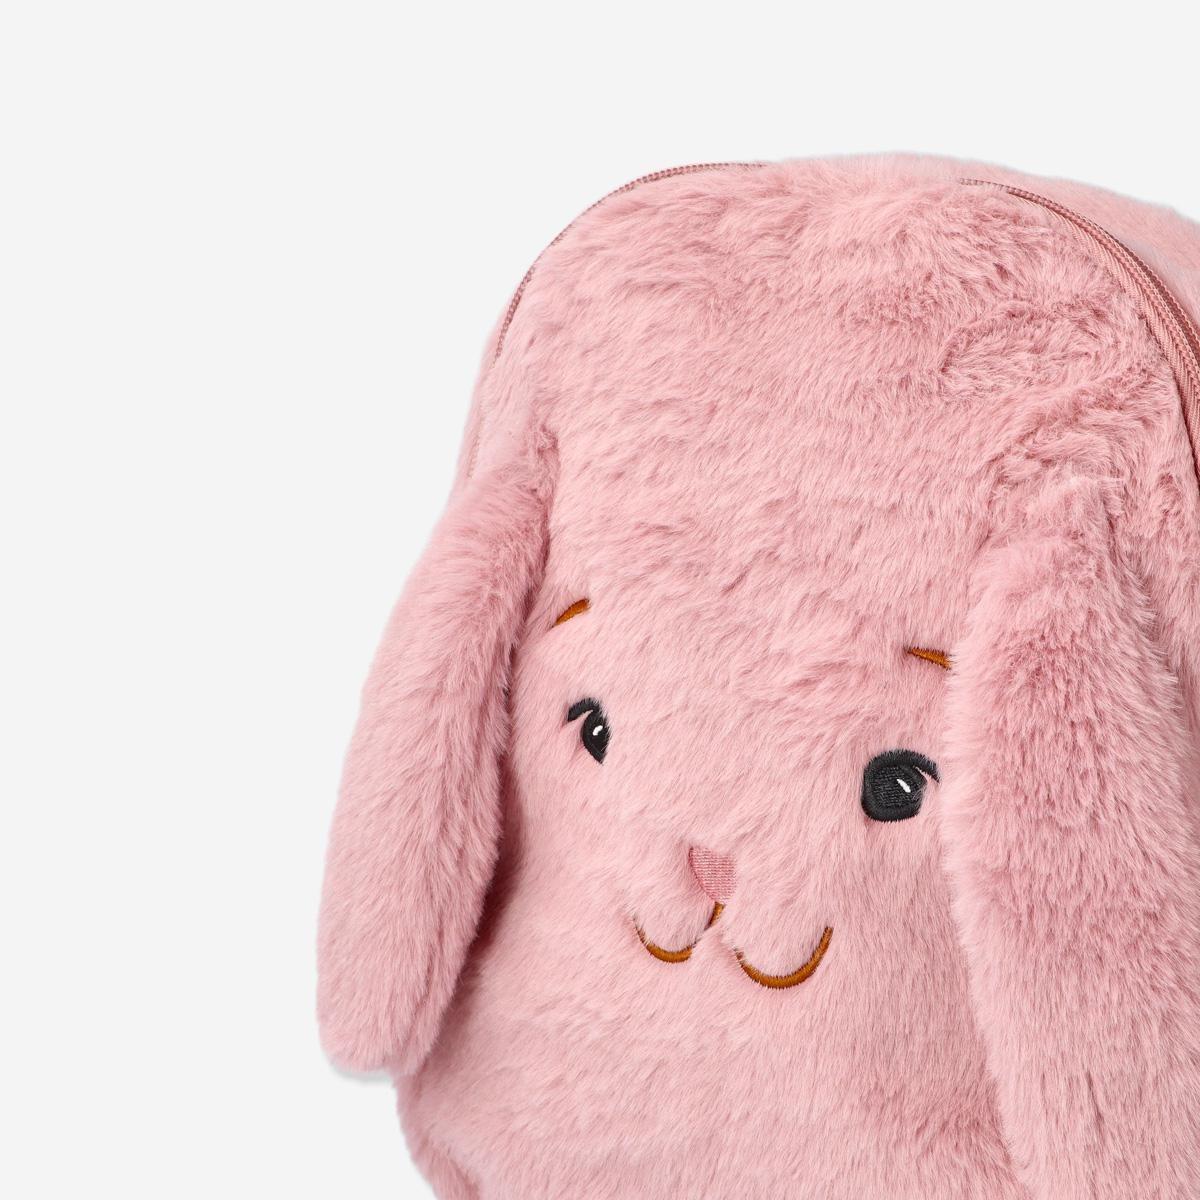 Pink bunny backpack